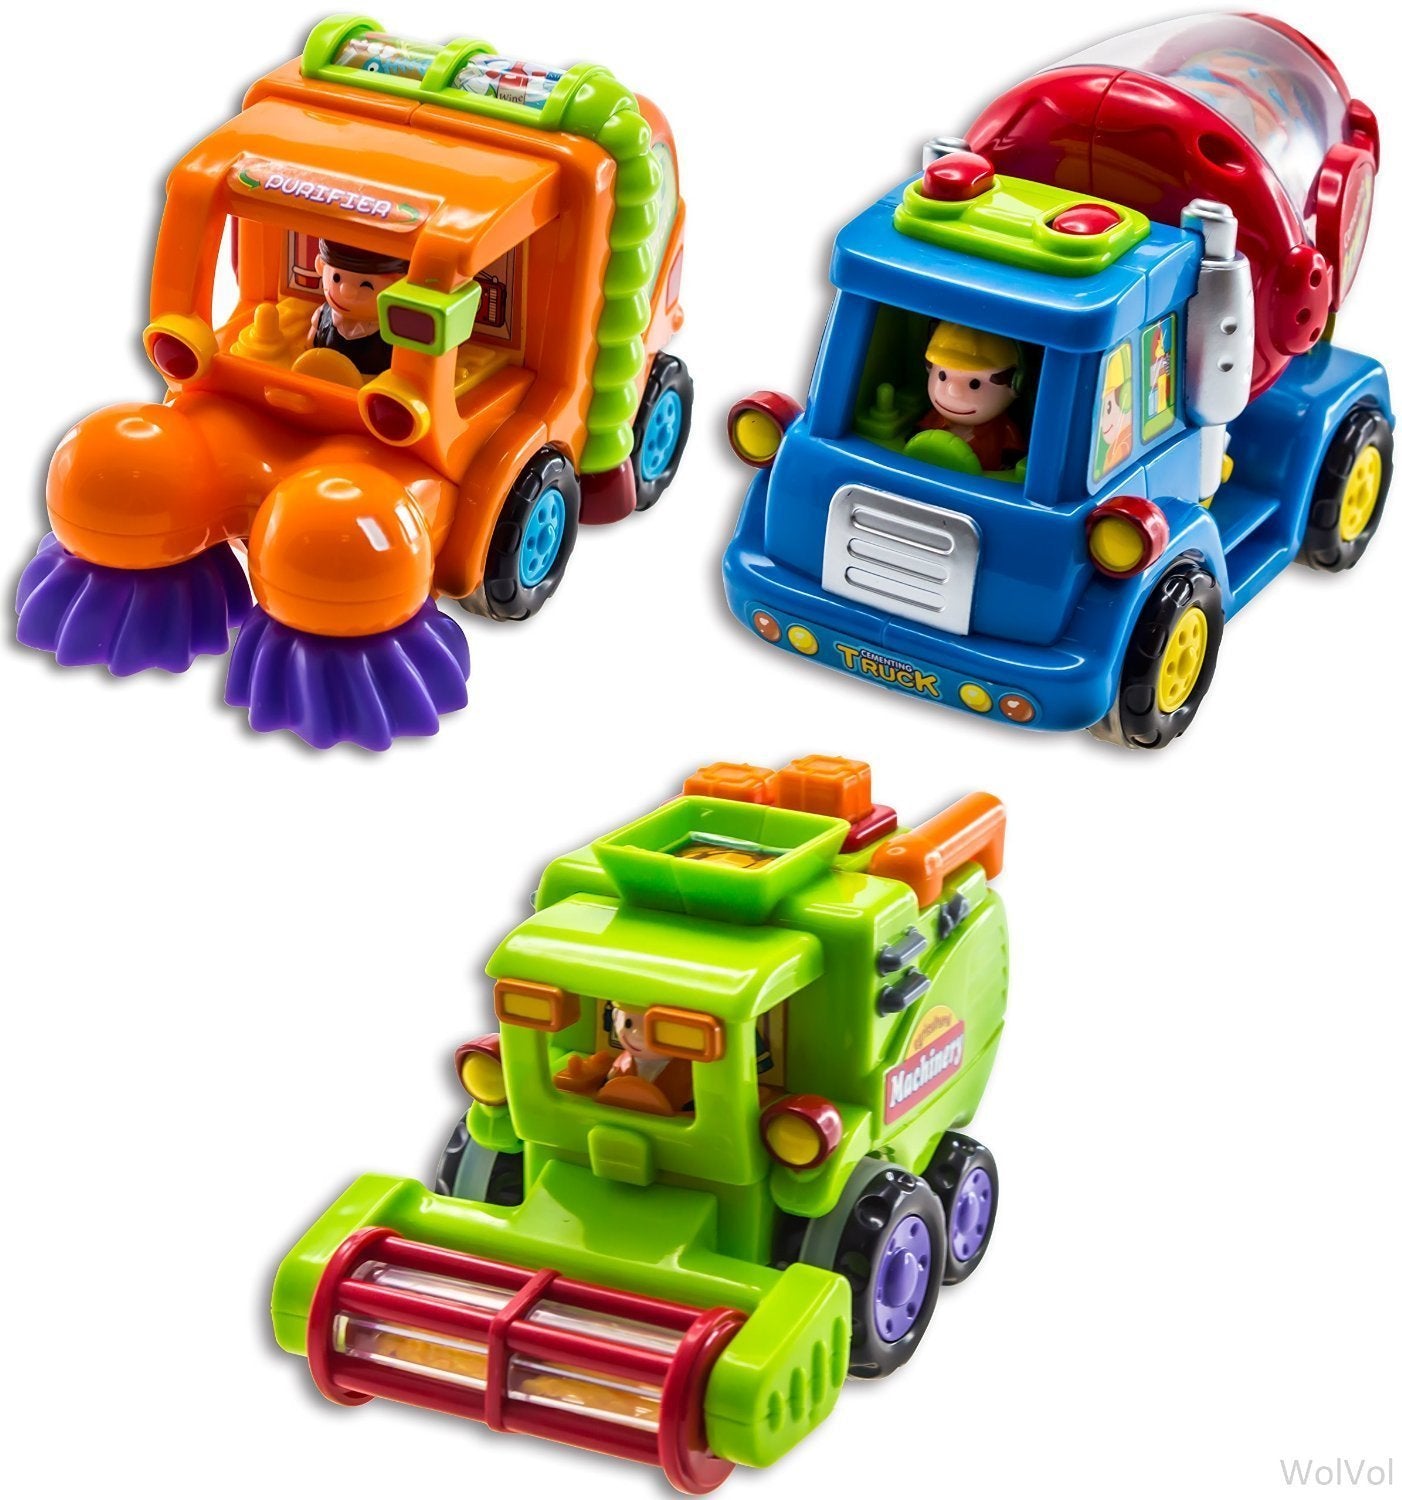 WolVolk Push and Go Friction Cars - Set of 3 Trucks - Street Sweeper, Cement Mixer, Harvester - Automatic Functions - Blue Green Orange - Size Options